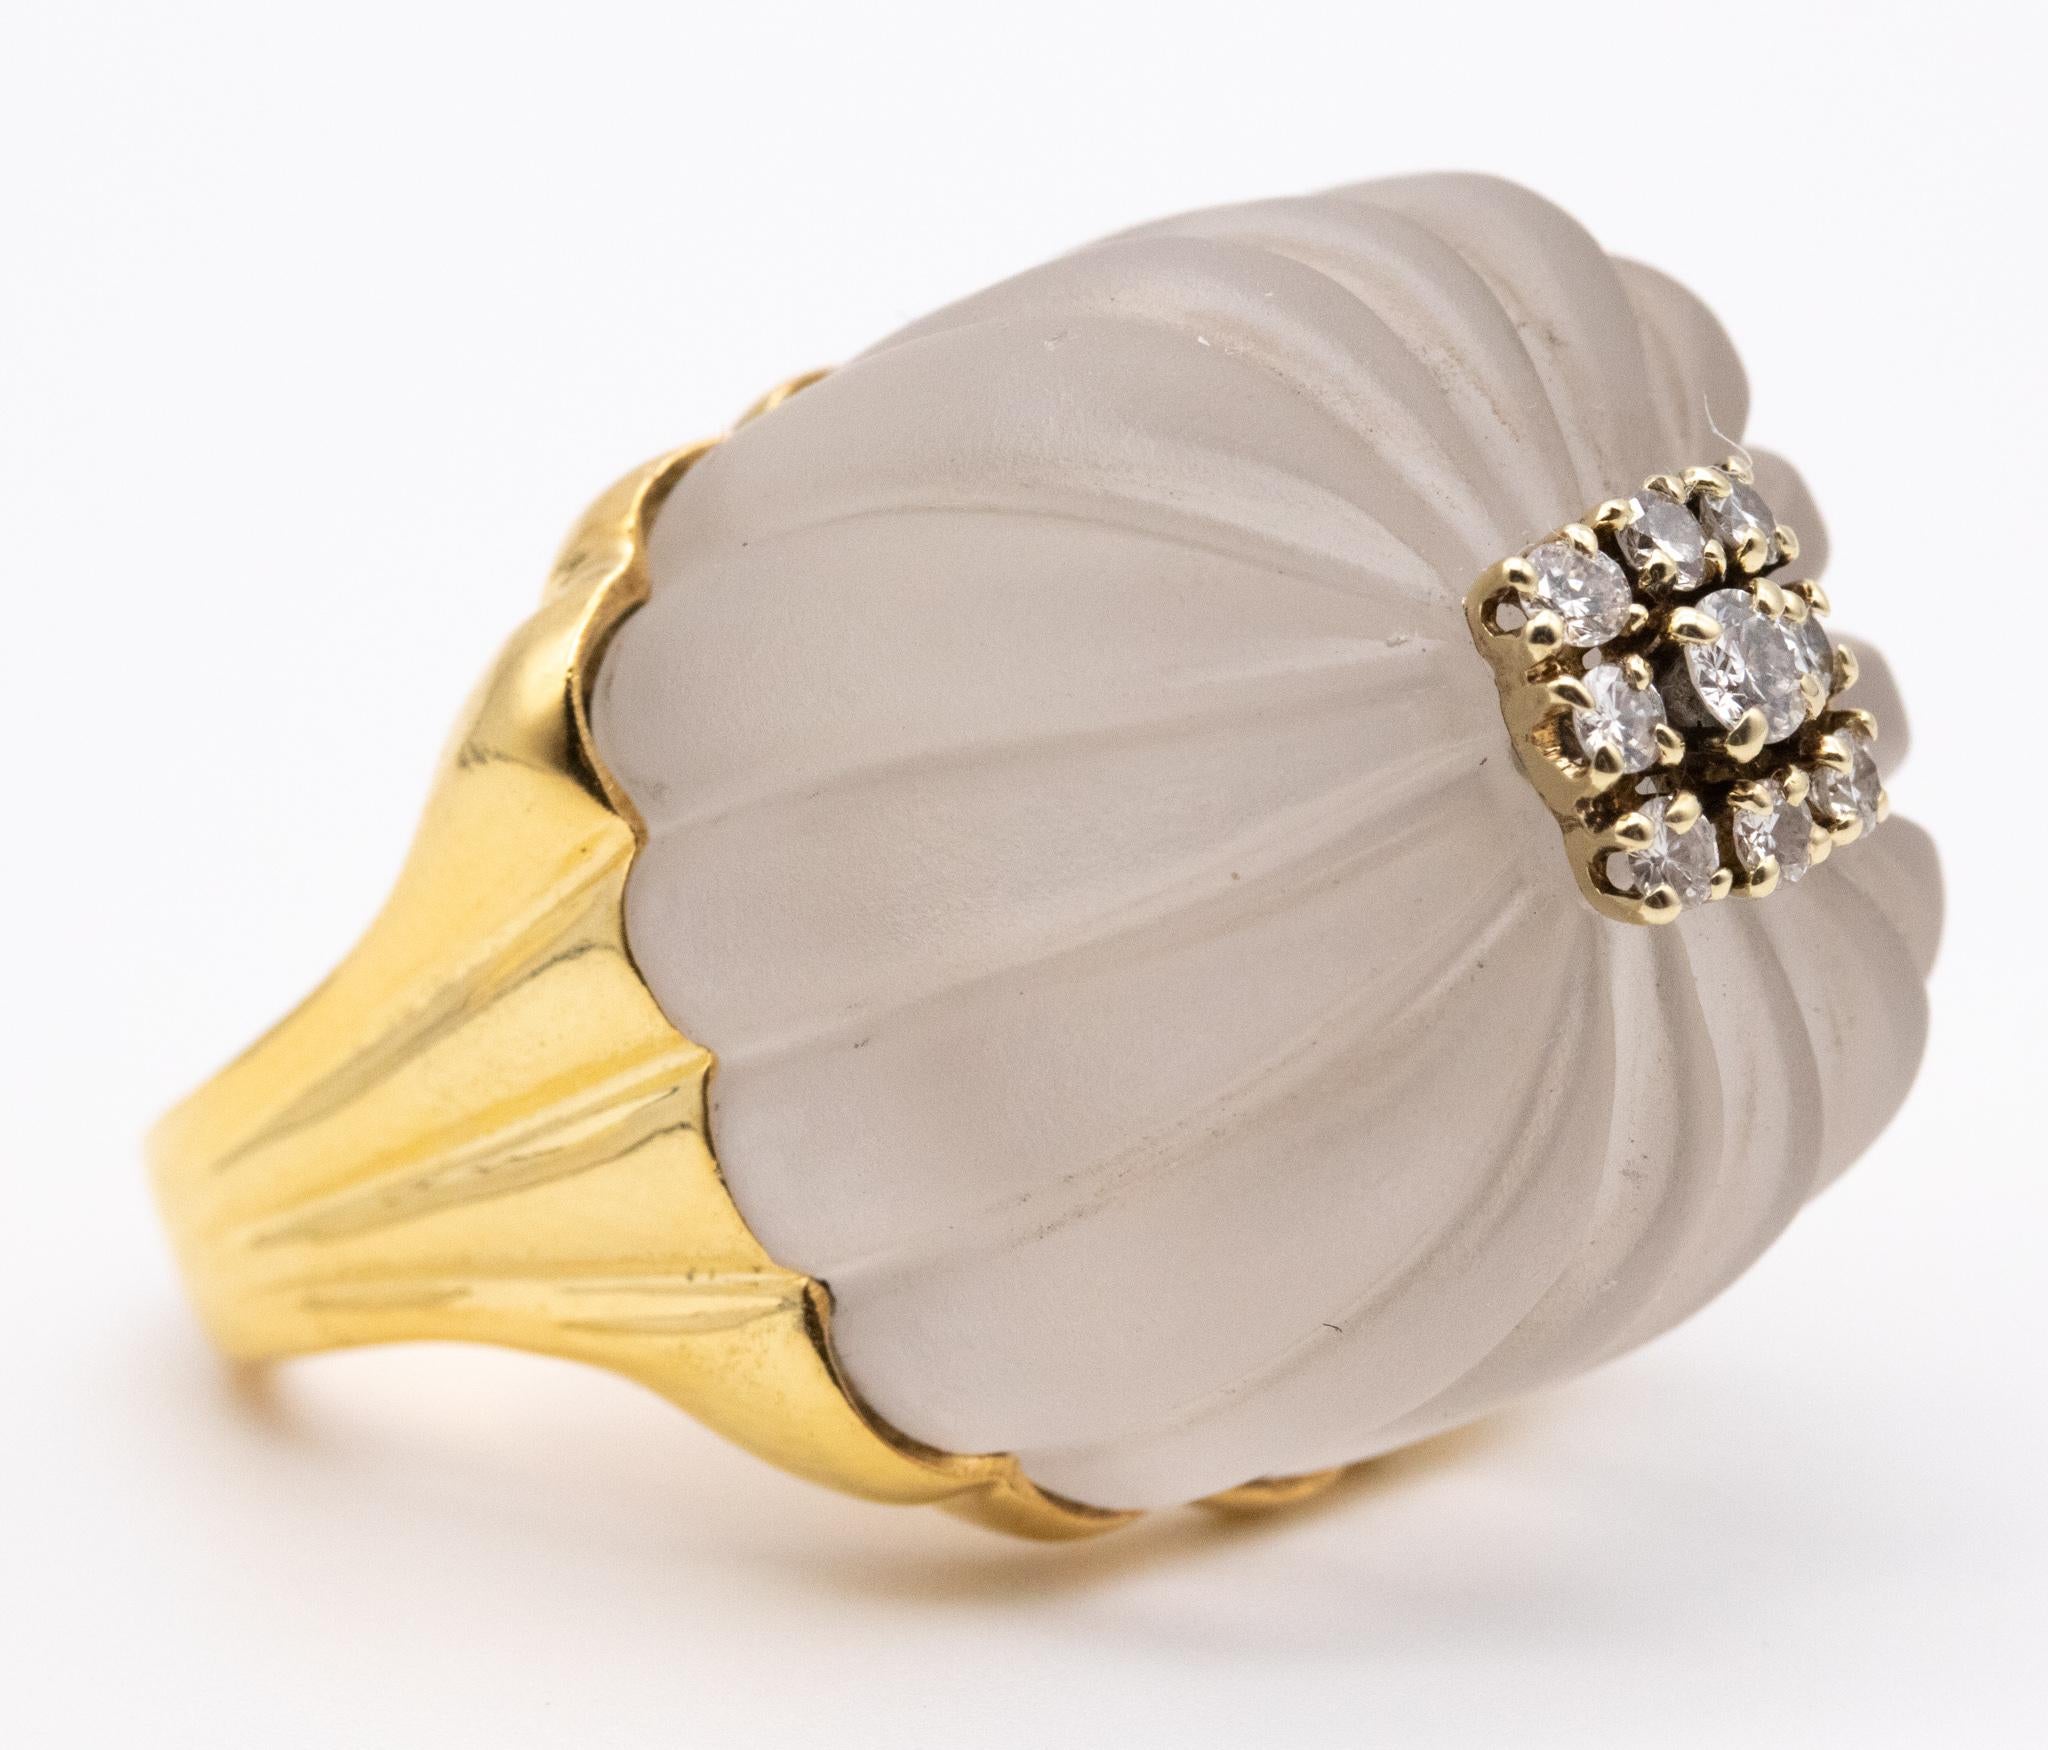 Women's Modernist Cocktail Ring in 18kt Gold with Carved Rock Quartz and VS Diamonds